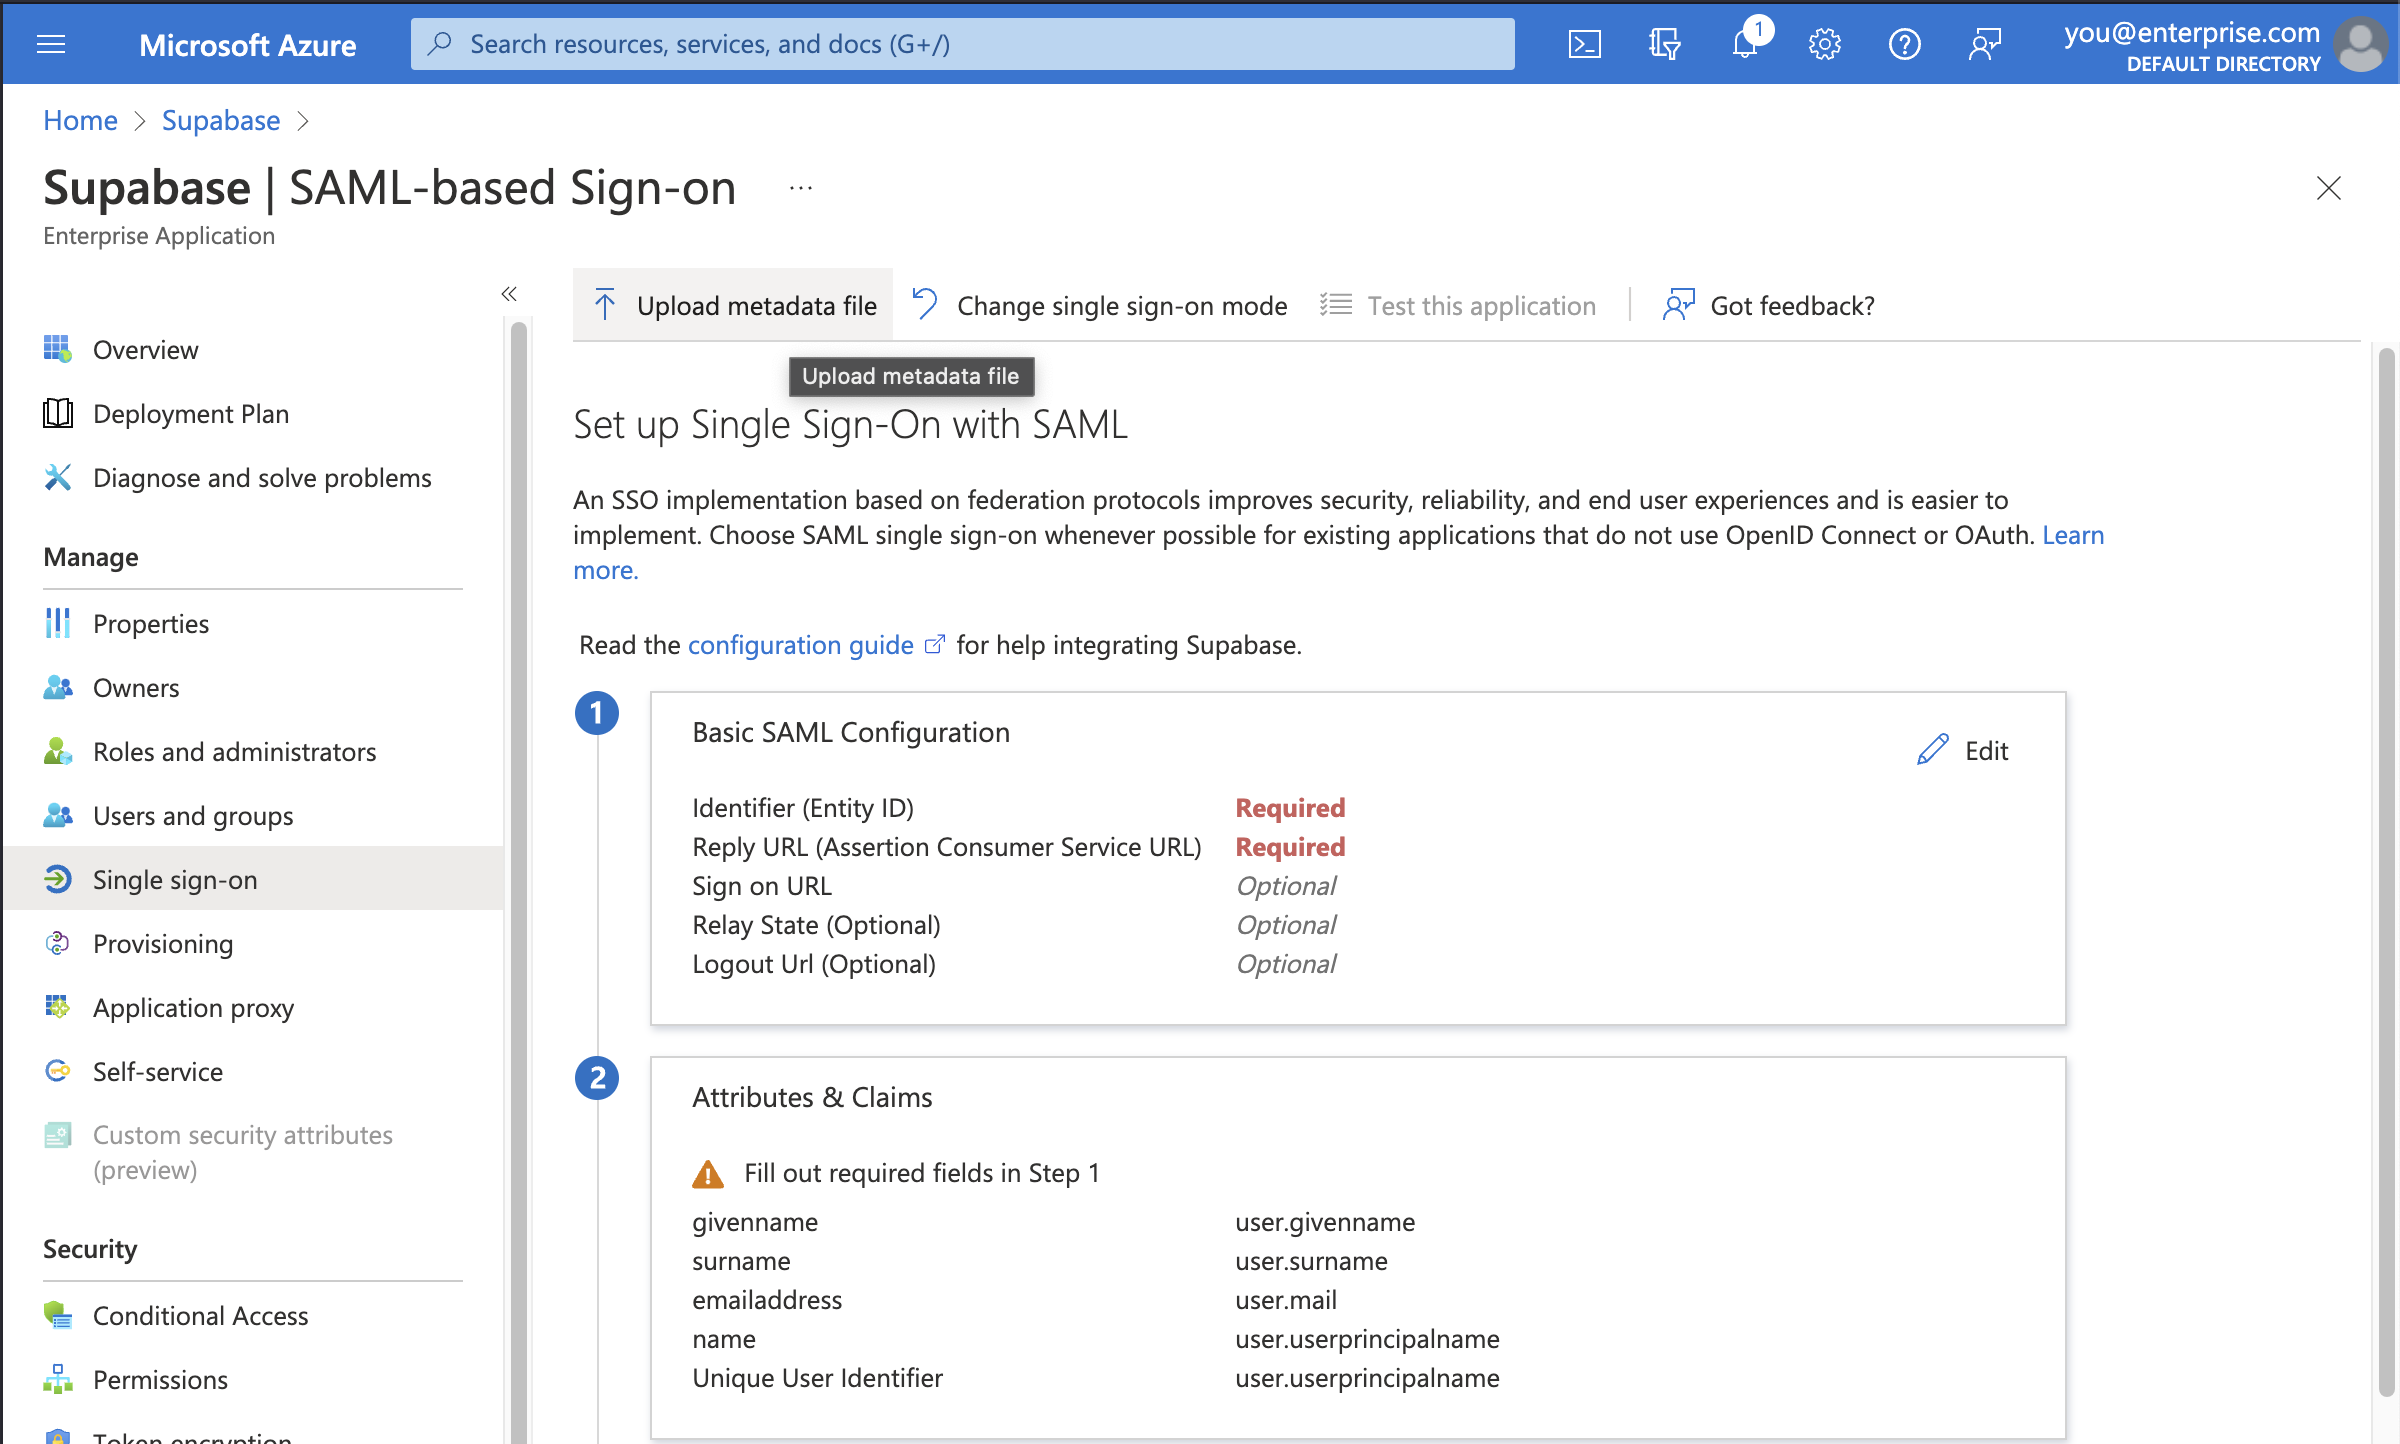 Azure AD console: Supabase application, SAML-based Sign-on screen, selected Upload metadata file button